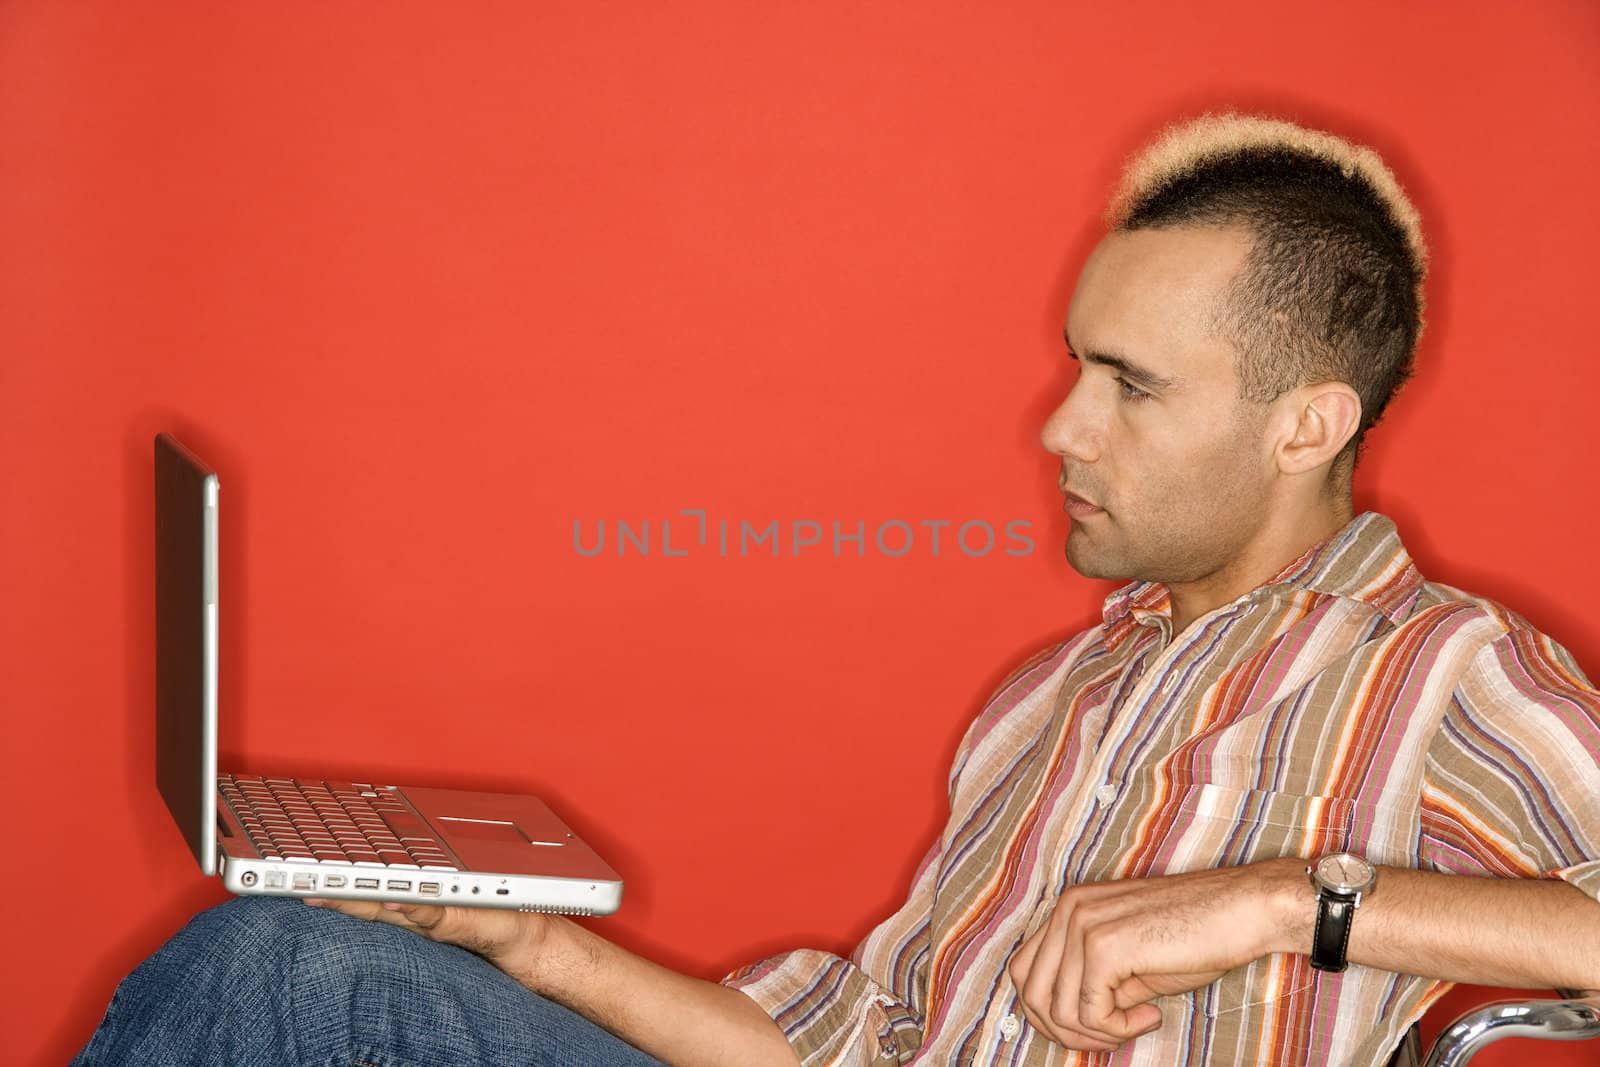 Caucasian man with mohawk holding laptop against red background.